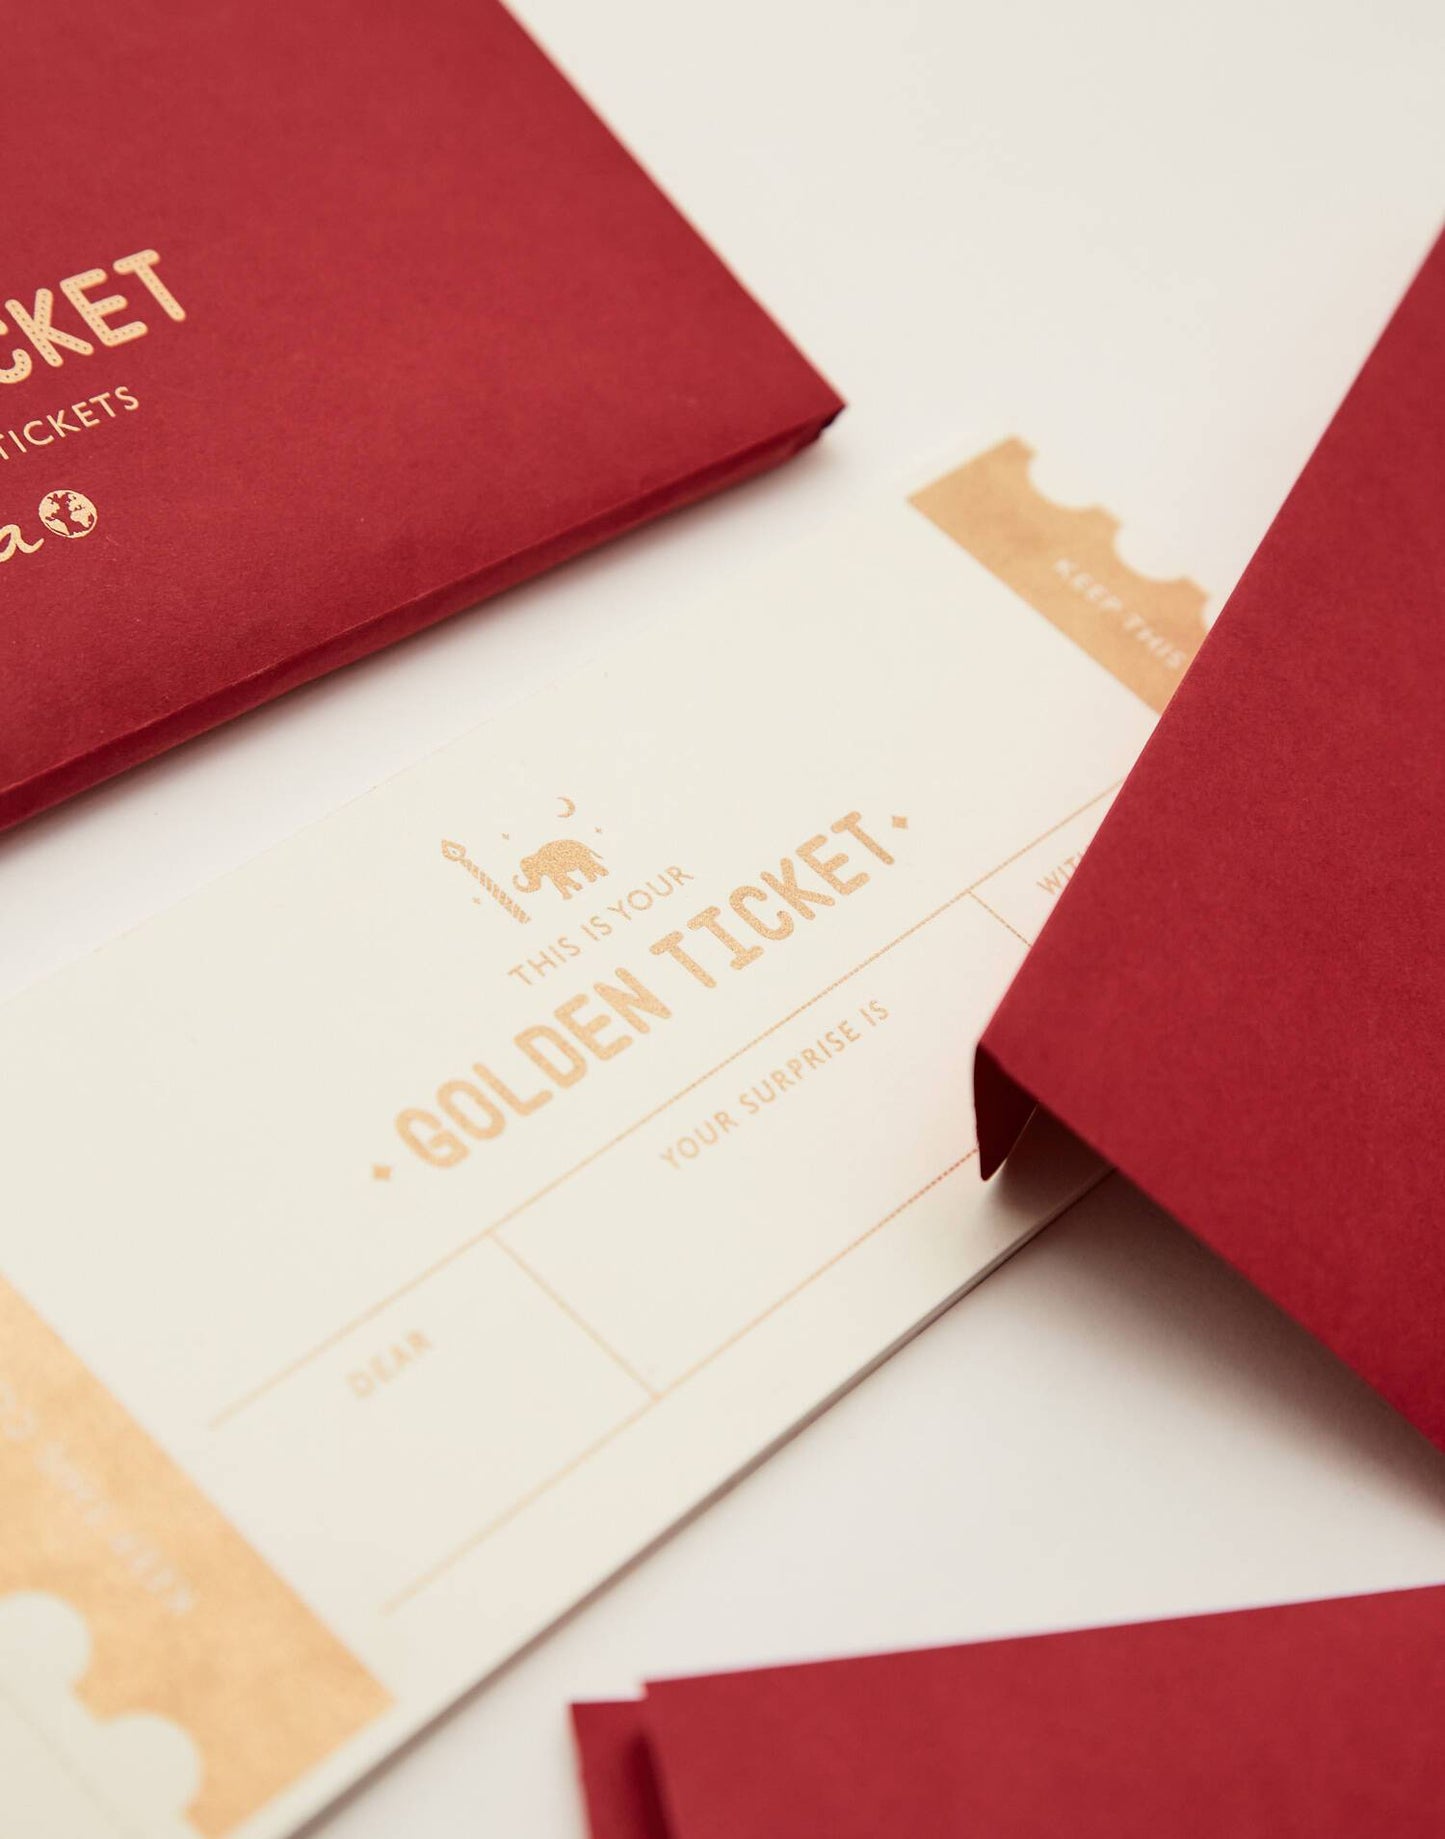 Golden tickets: 10 gift coupons